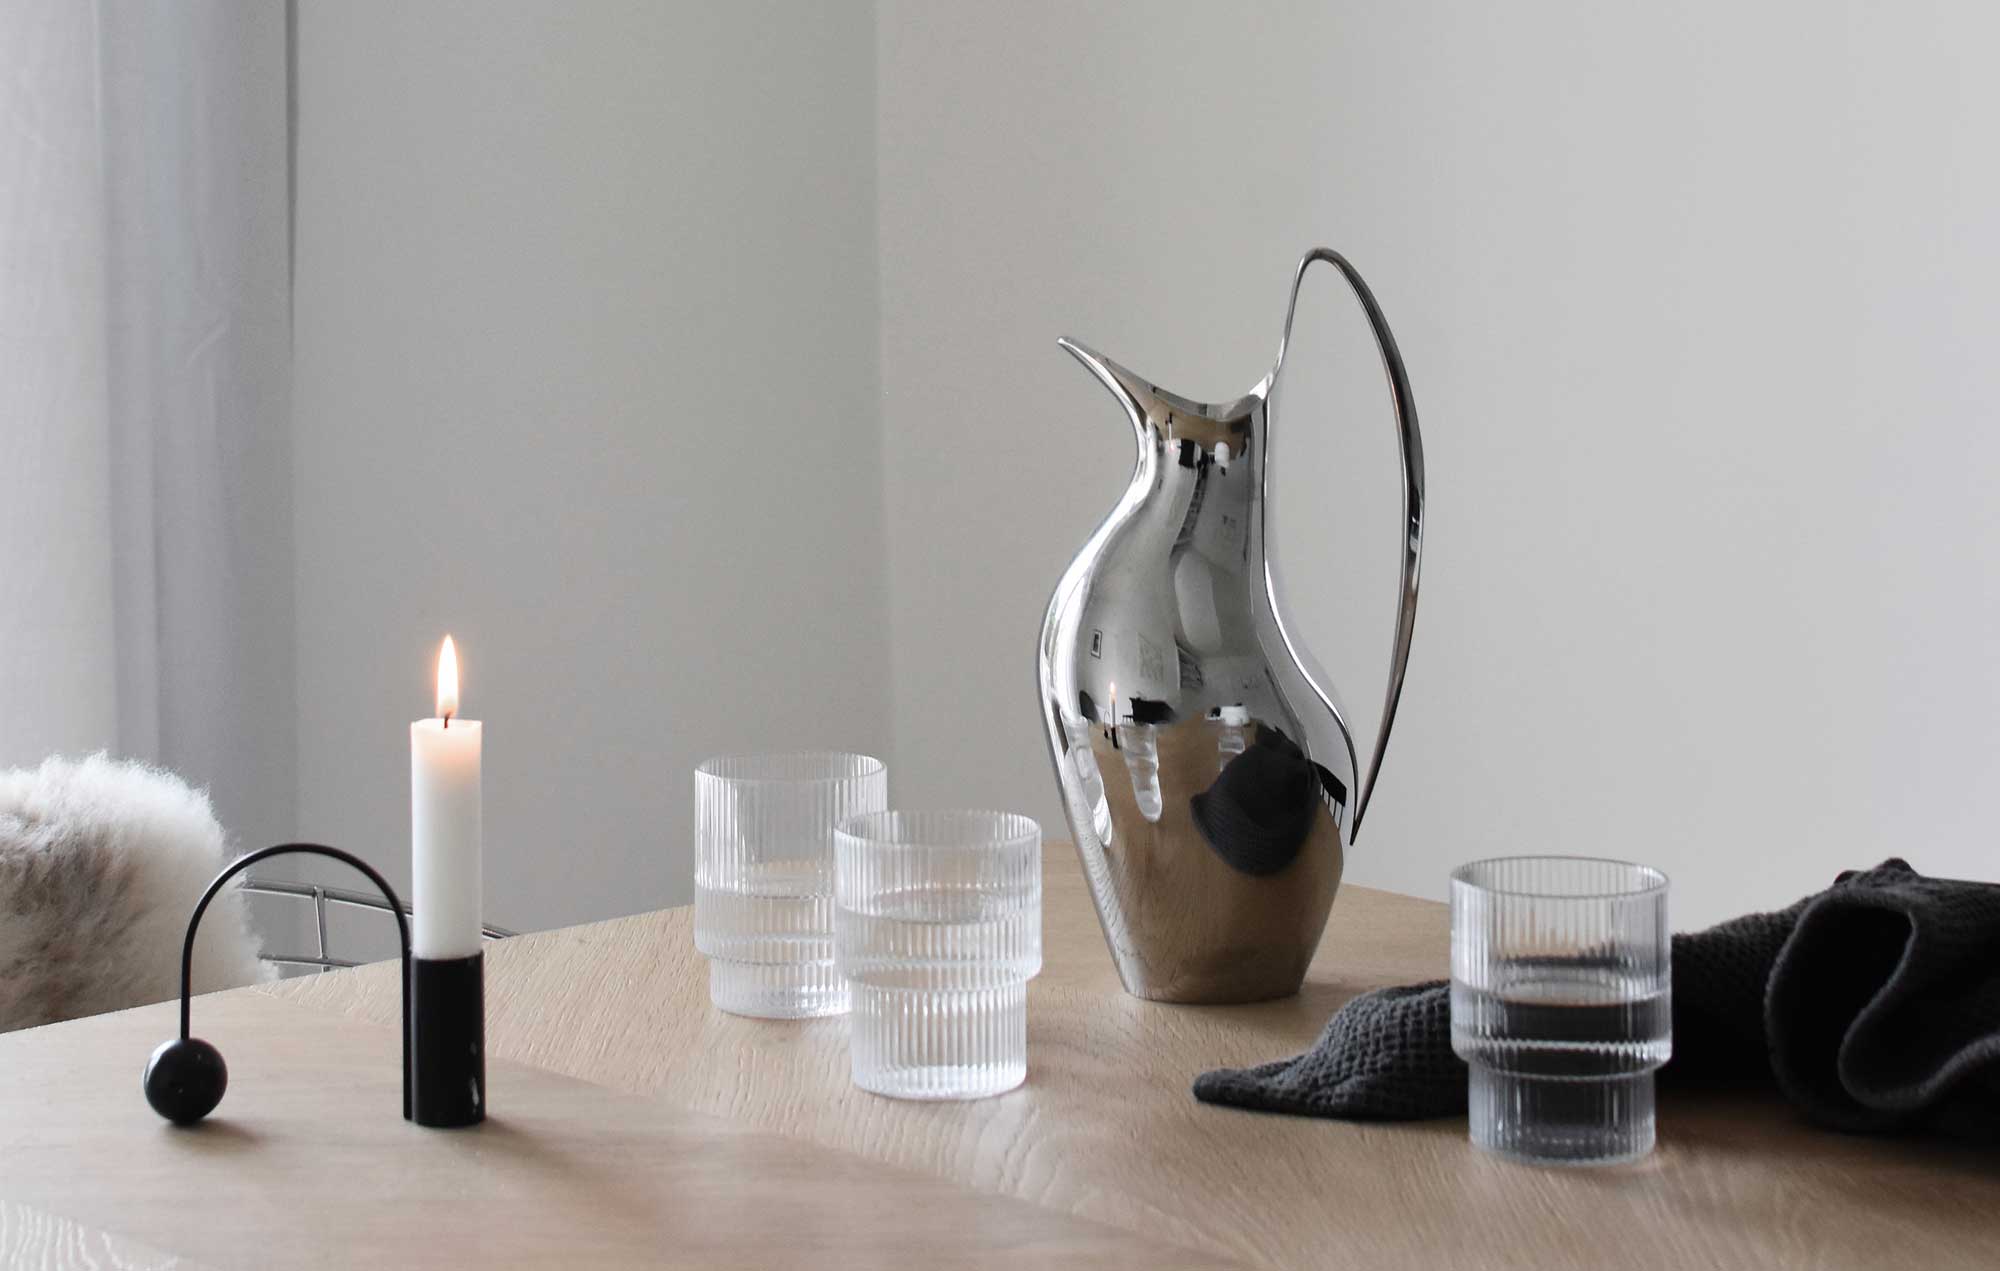 Focus on: Georg Jensen's 'HK' pitcher | These Four Walls blog